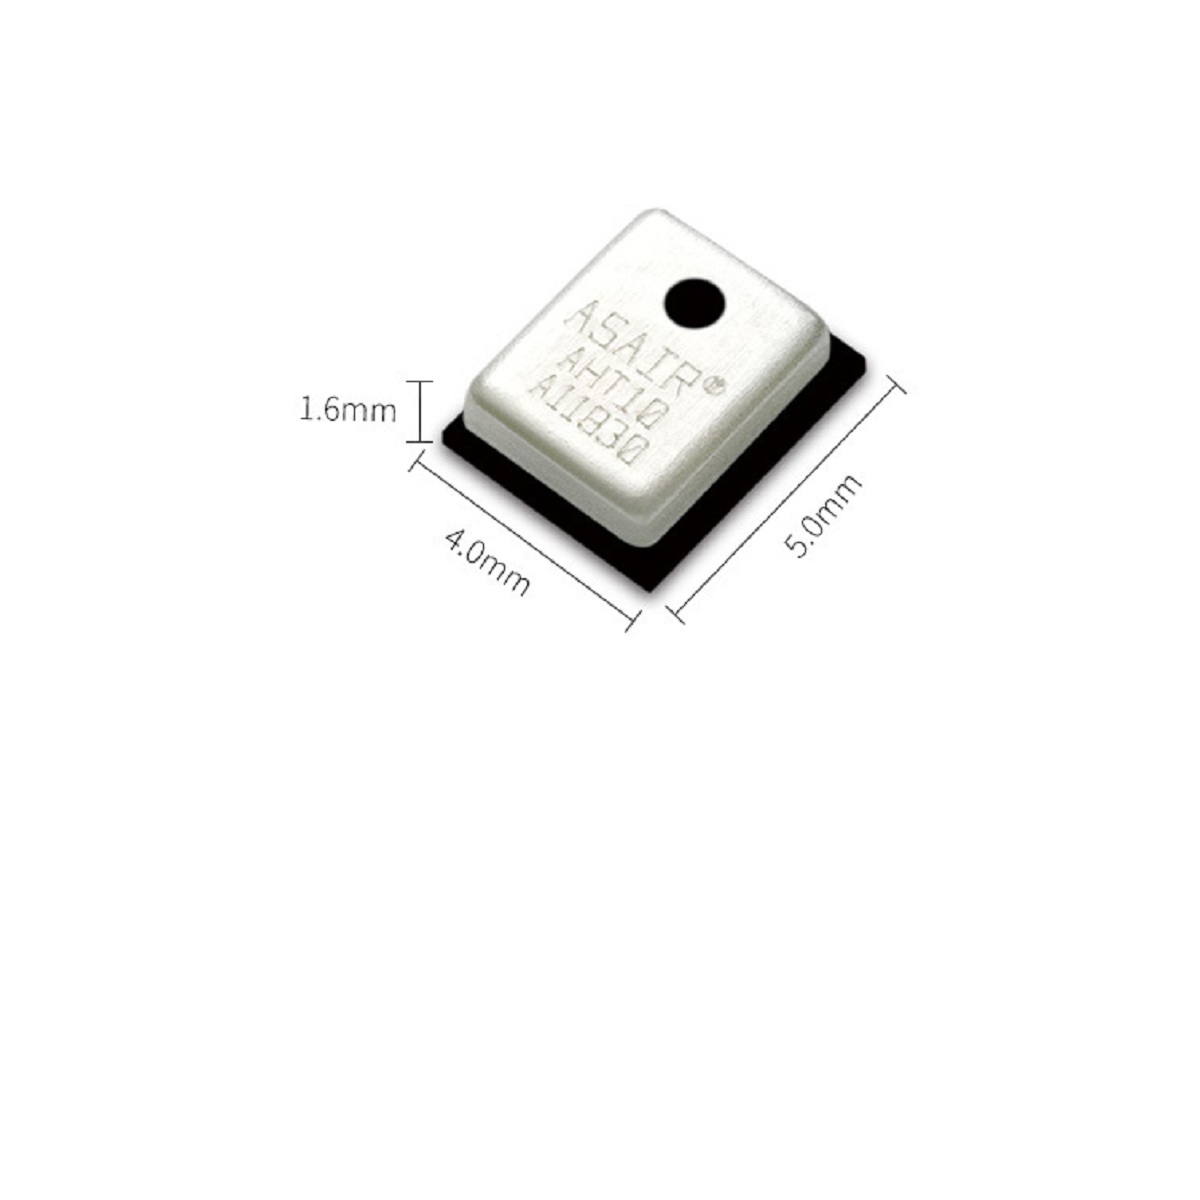 5-Pieces-AHT10-Integrated-Temperature-and-Humidity-Sensor-Patch-Packaged-Temperature-Sensor-1557259-4